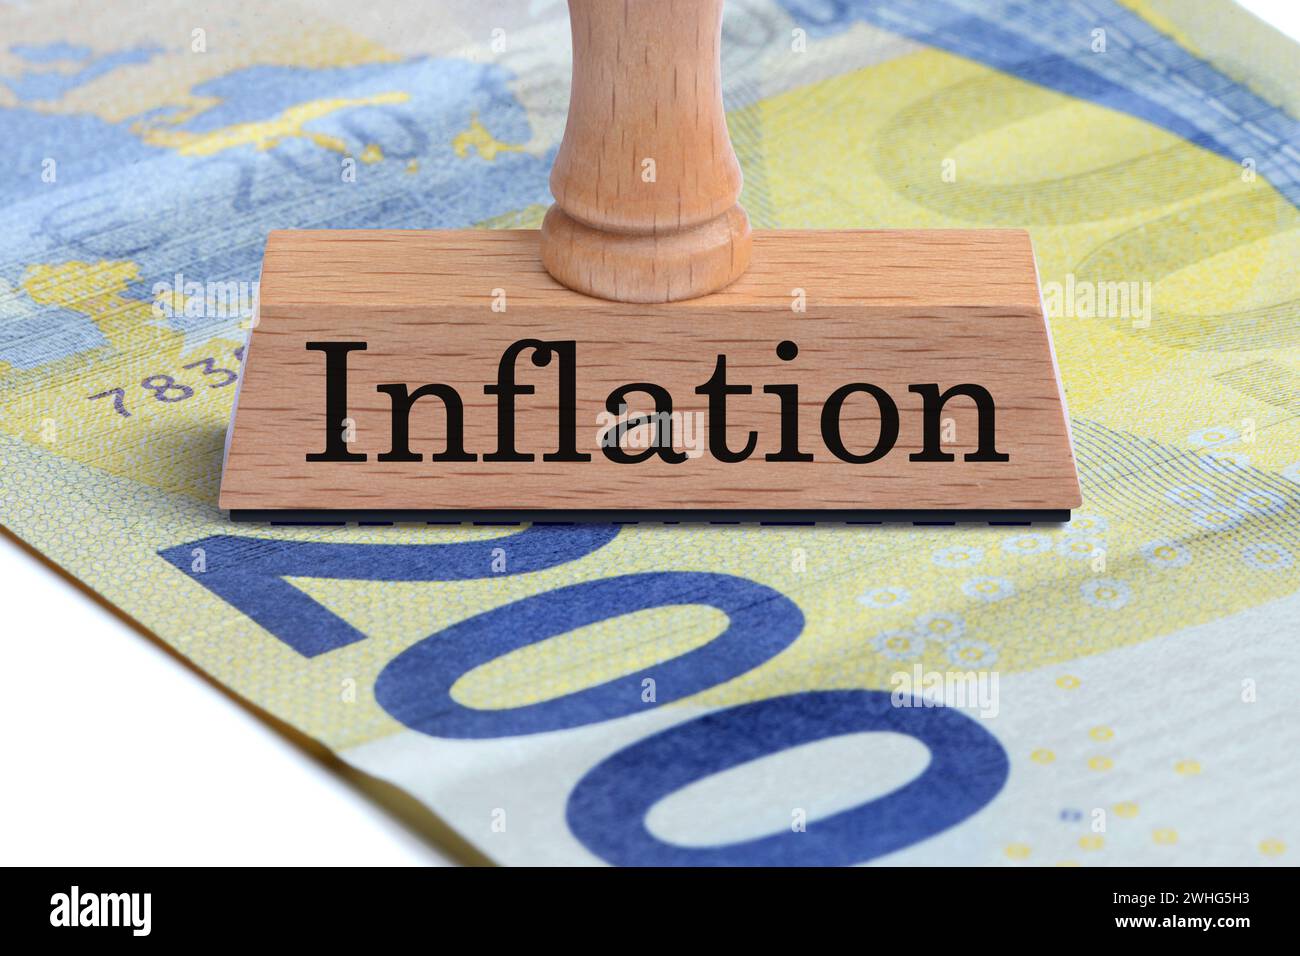 Inflation Stock Photo